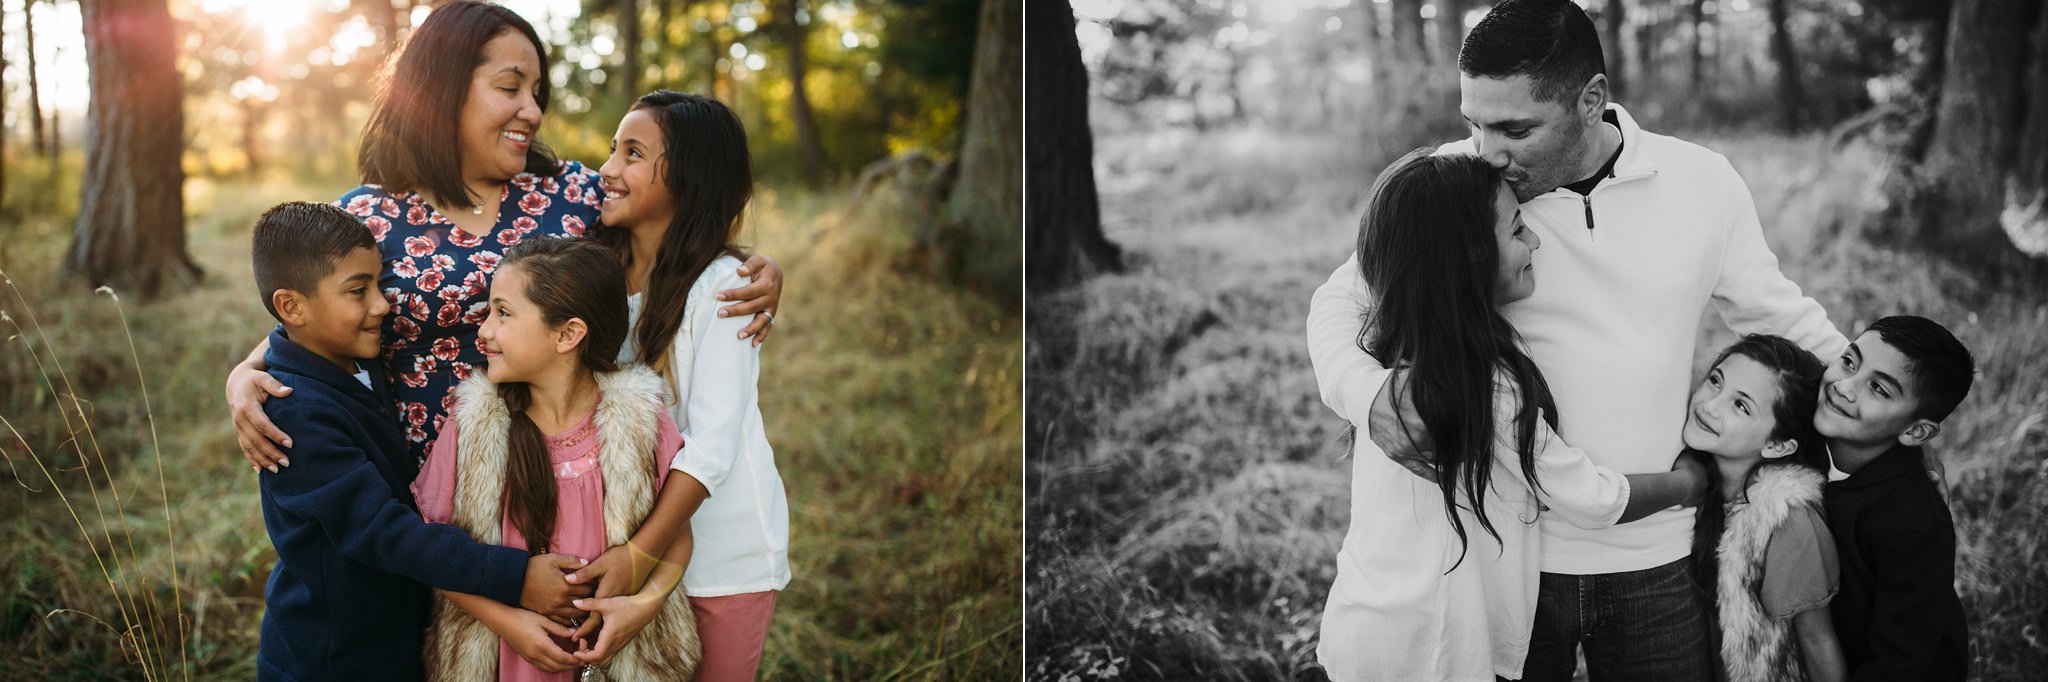 Fall Family Pictures in Beautiful Field | Whidbey Island Family Photographer